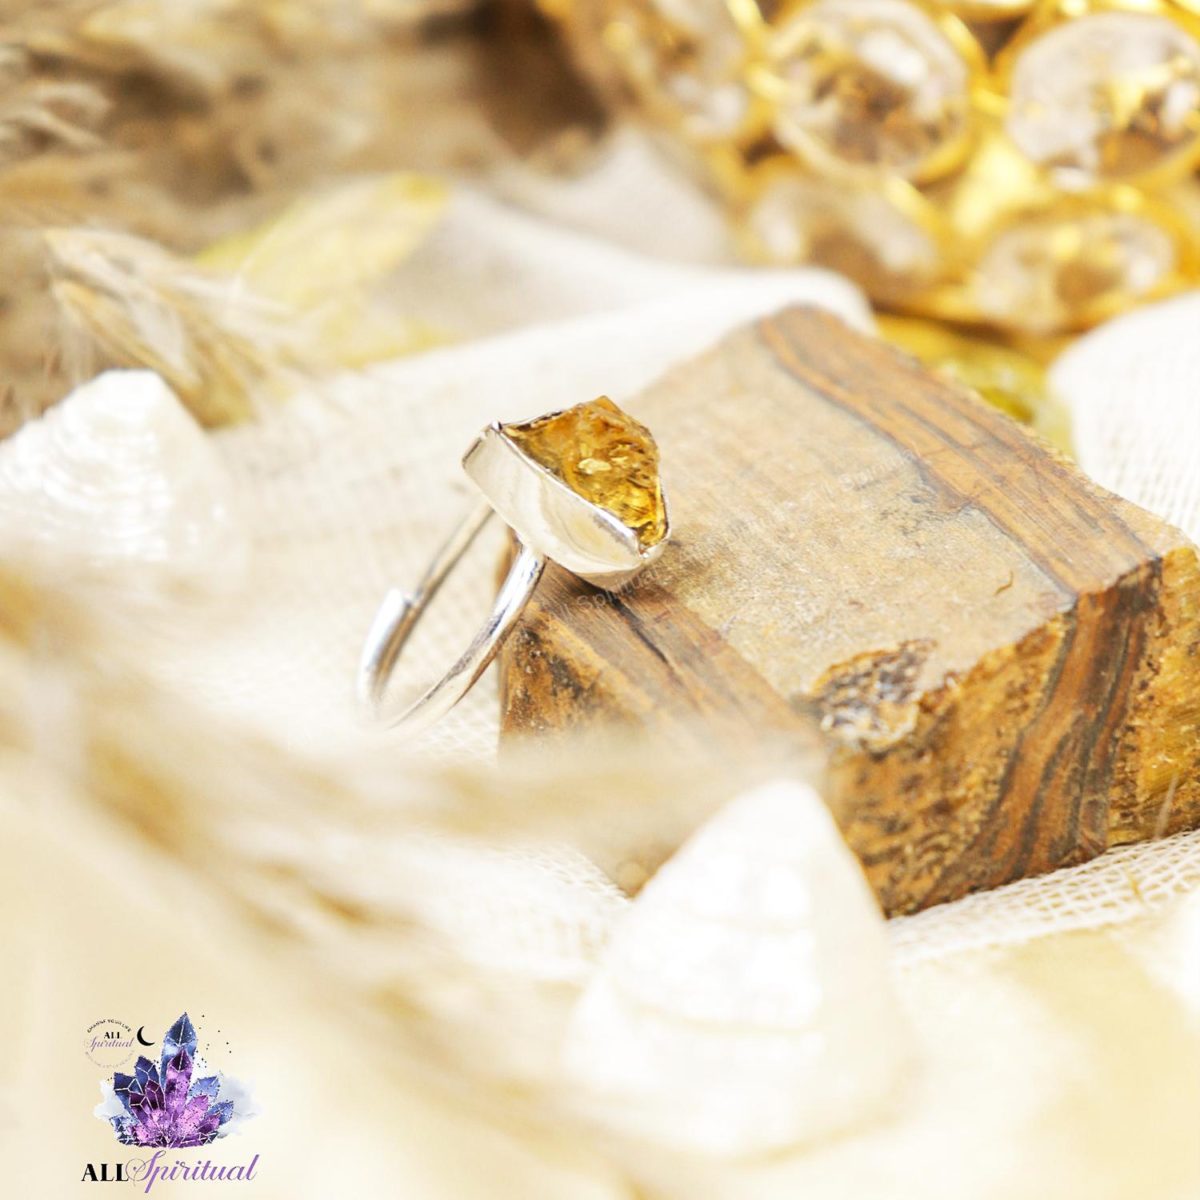 Citrine Silver Adjustable Crystal Ring (Stone of Wealth)